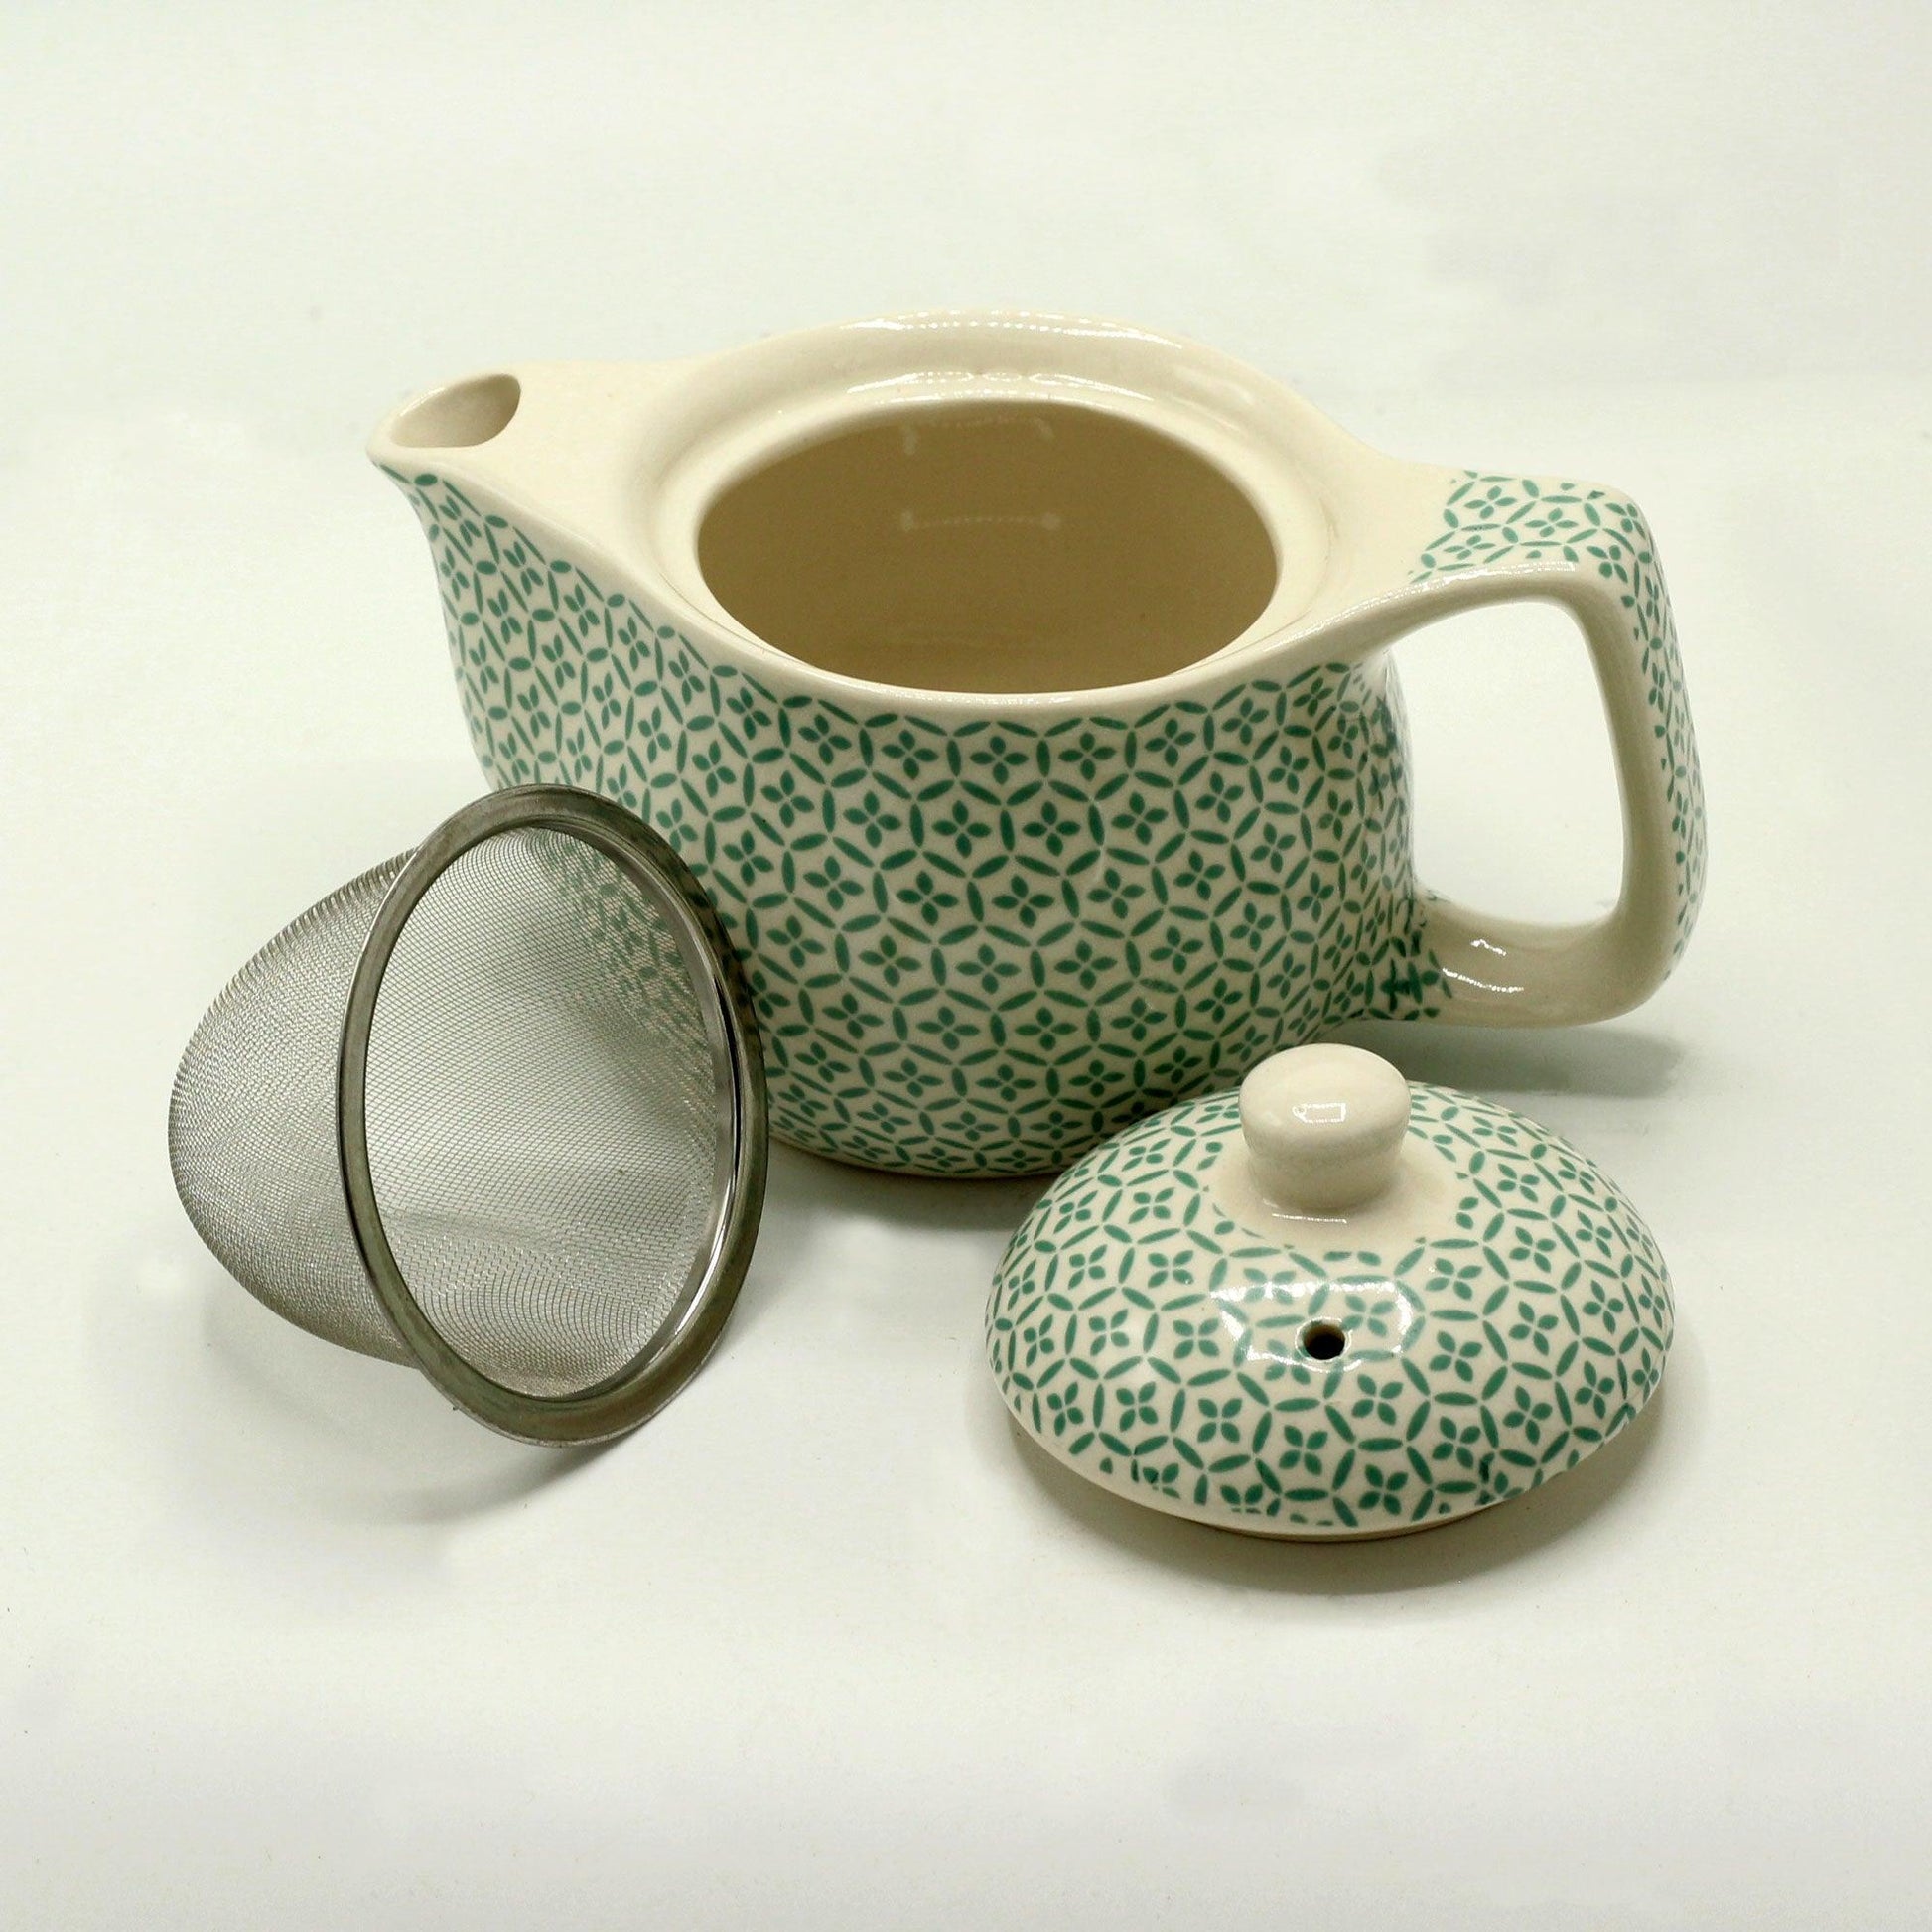 Small Herbal Teapot - Green Mosaic - DuvetDay.co.uk